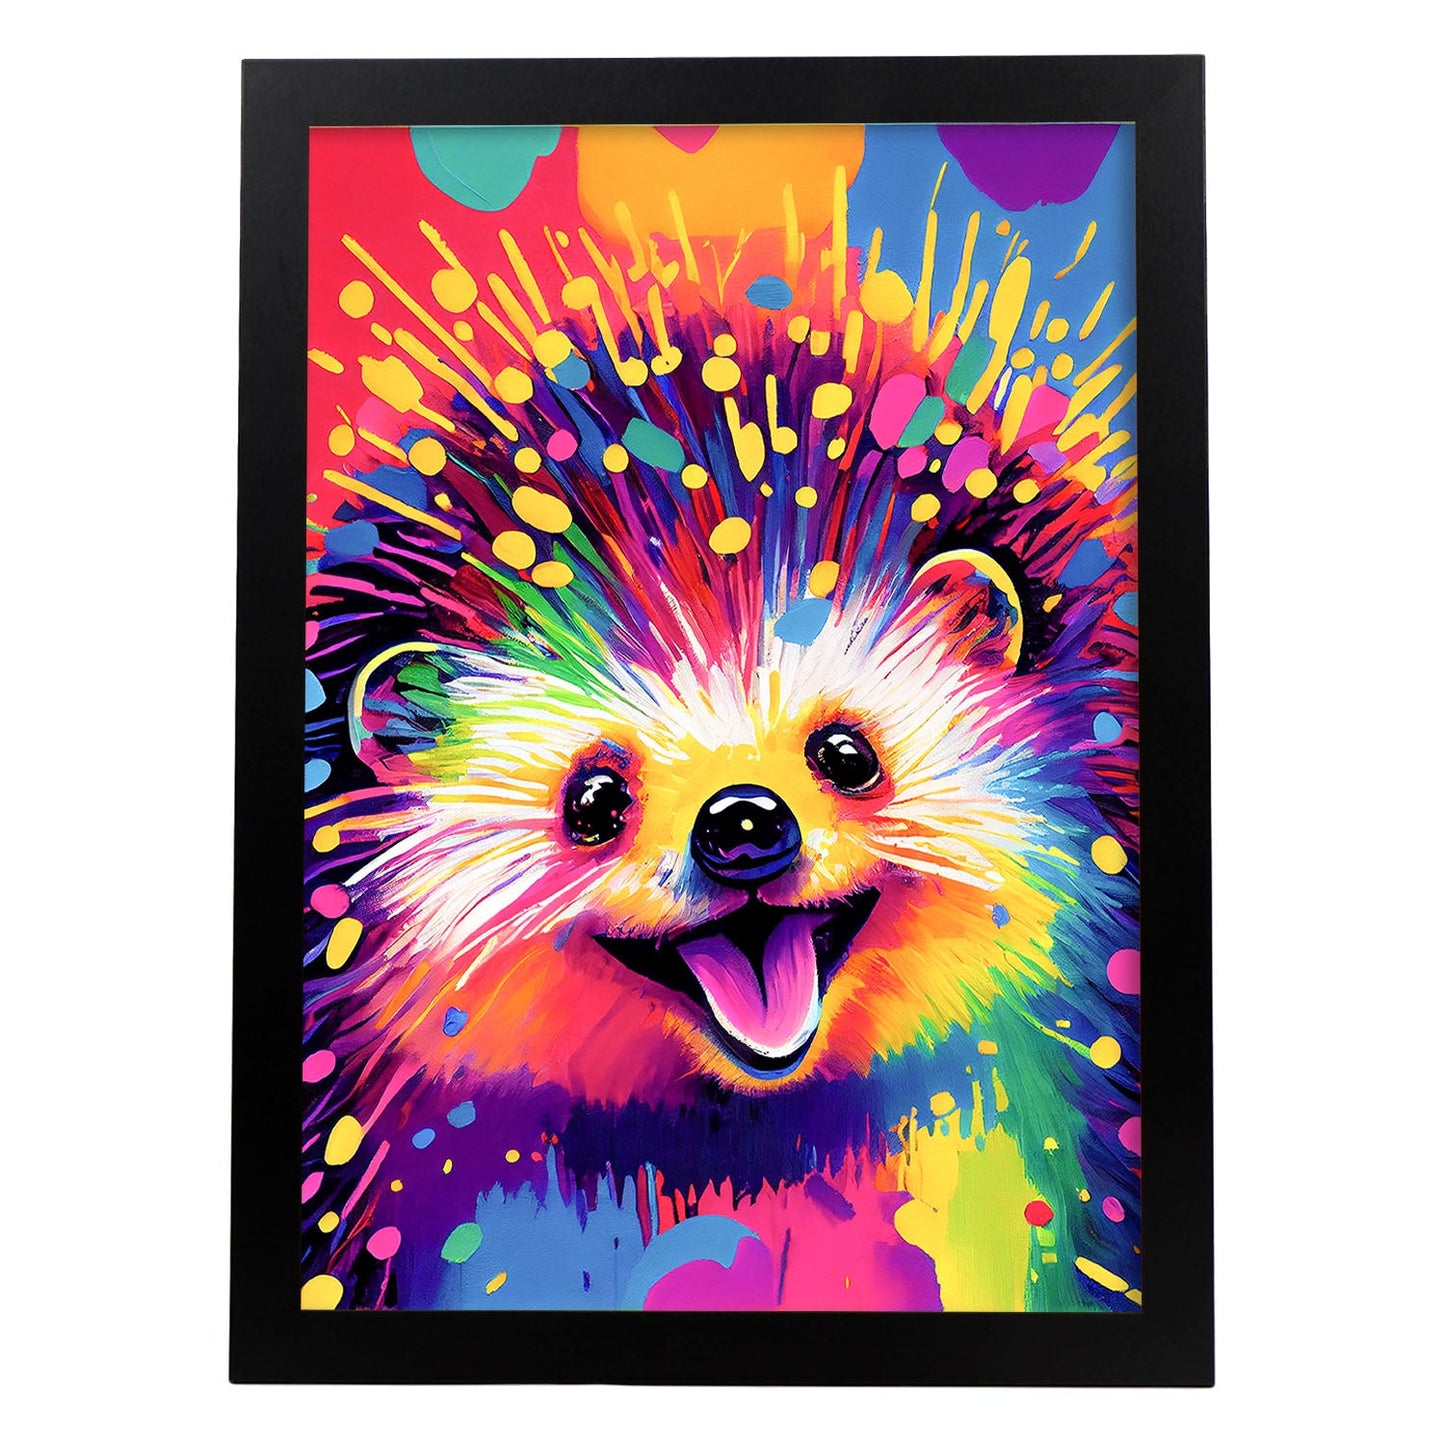 Nacnic Abstract smiling Hedgehog in Lisa Fran Style_1. Aesthetic Wall Art Prints for Bedroom or Living Room Design.